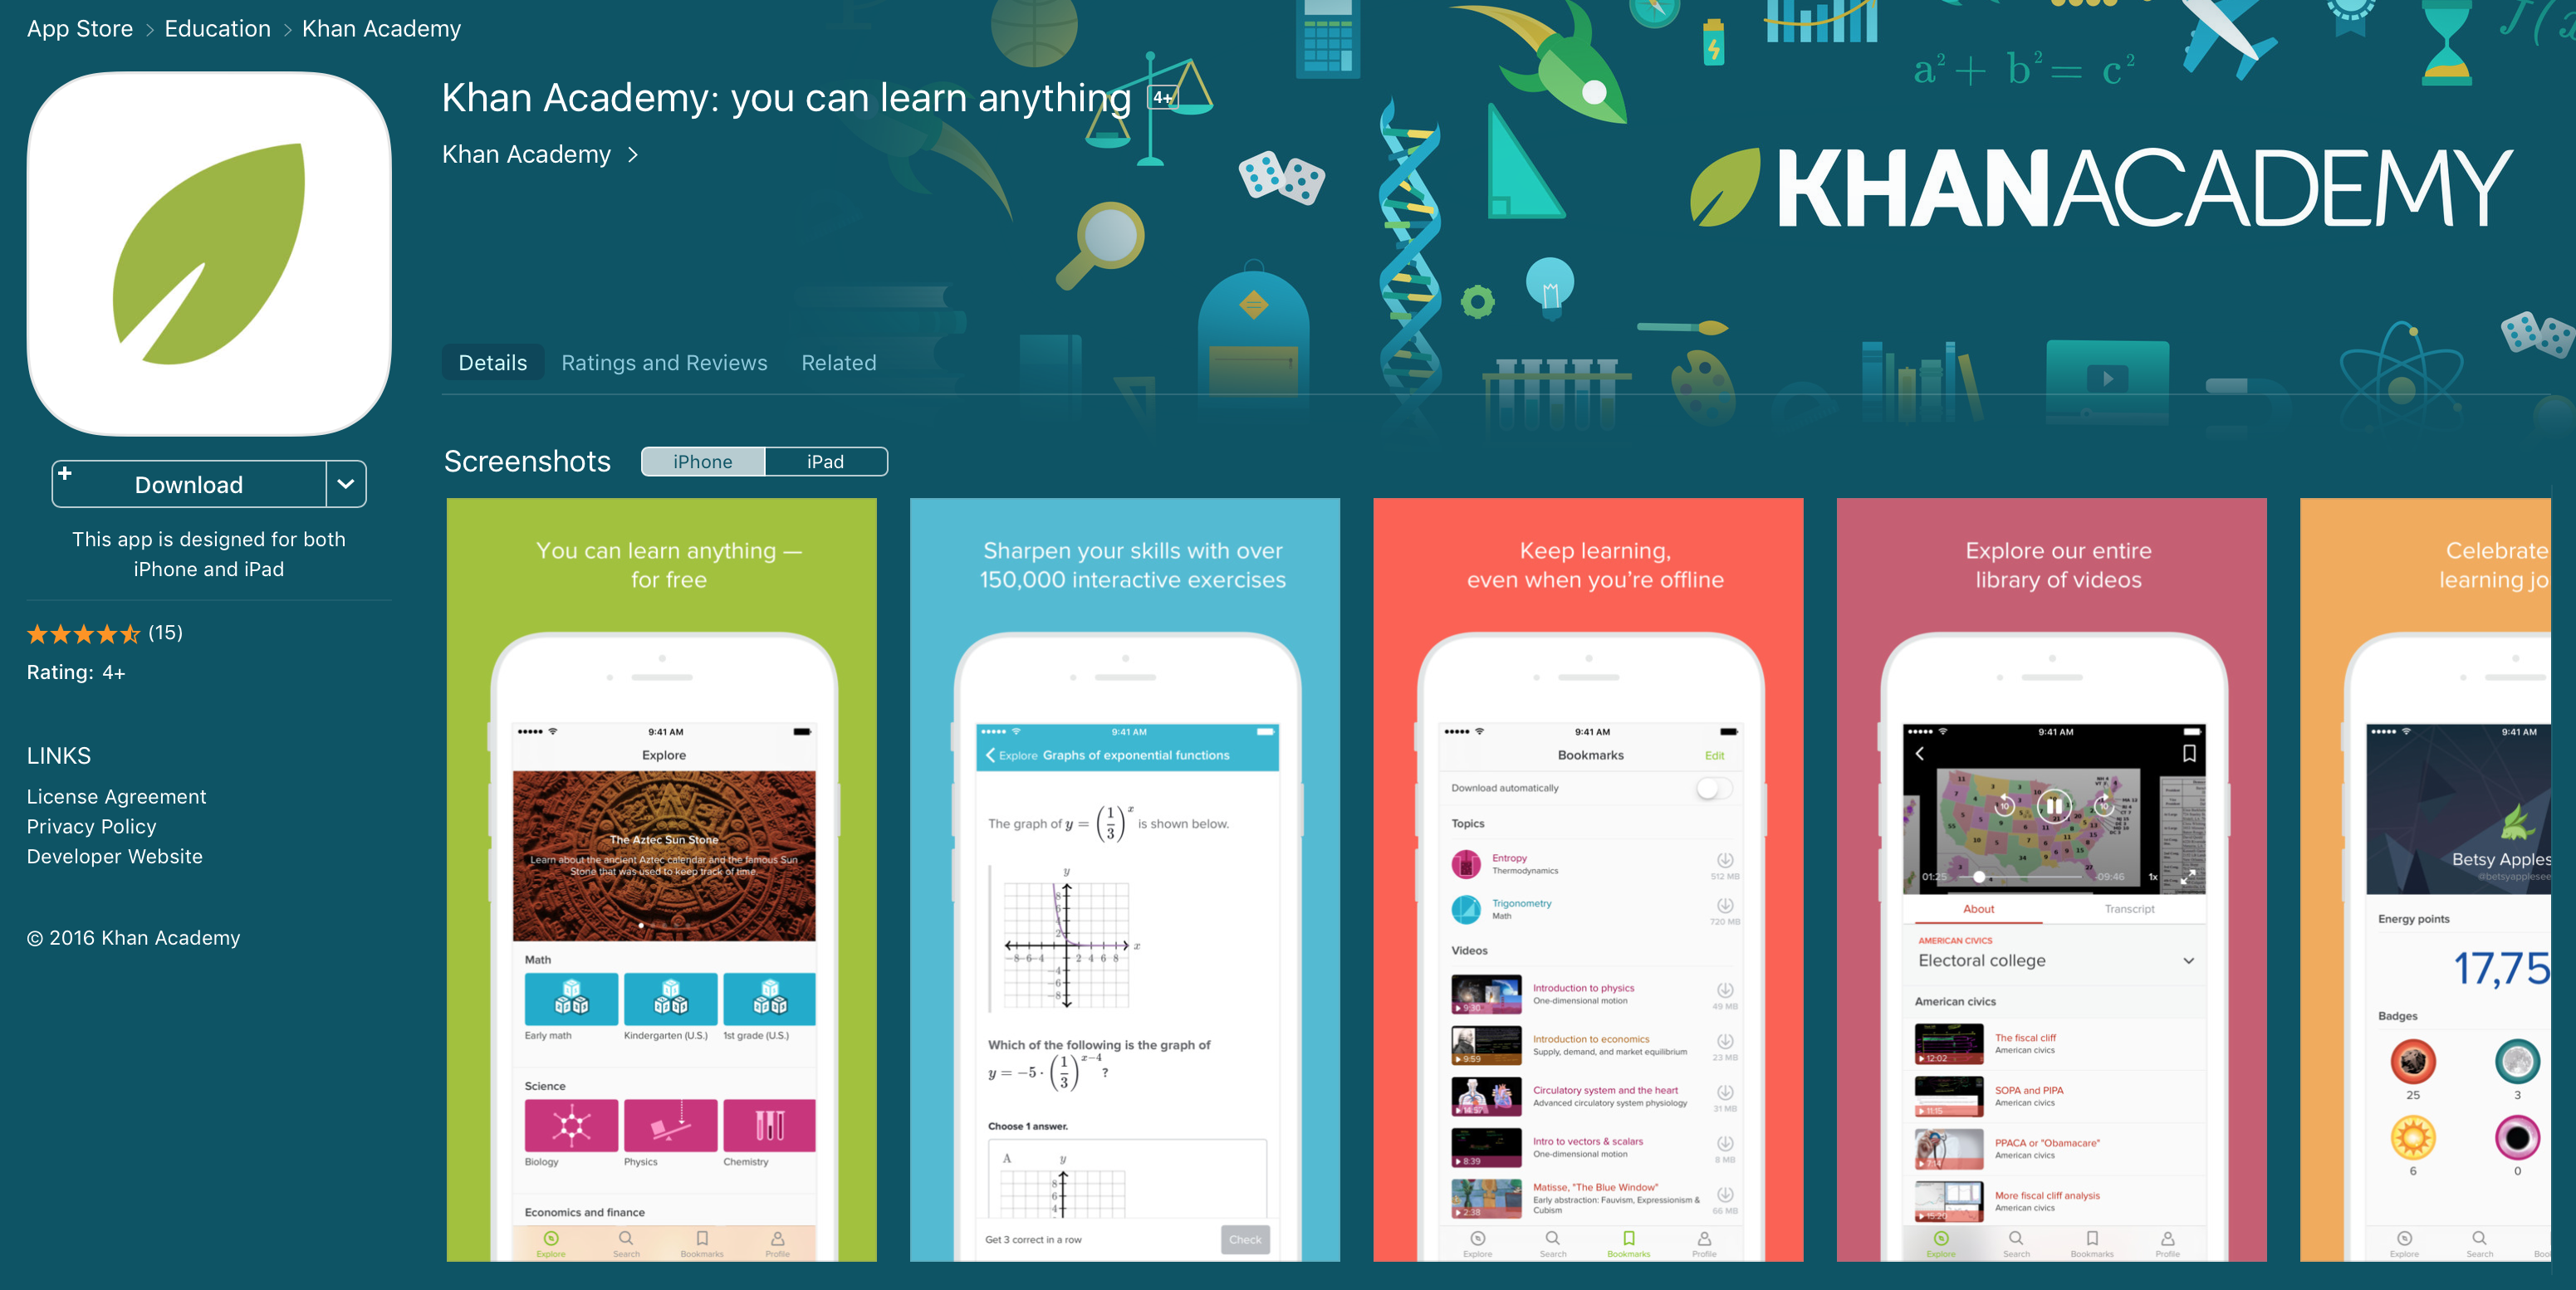 Khan Academy in the App Store